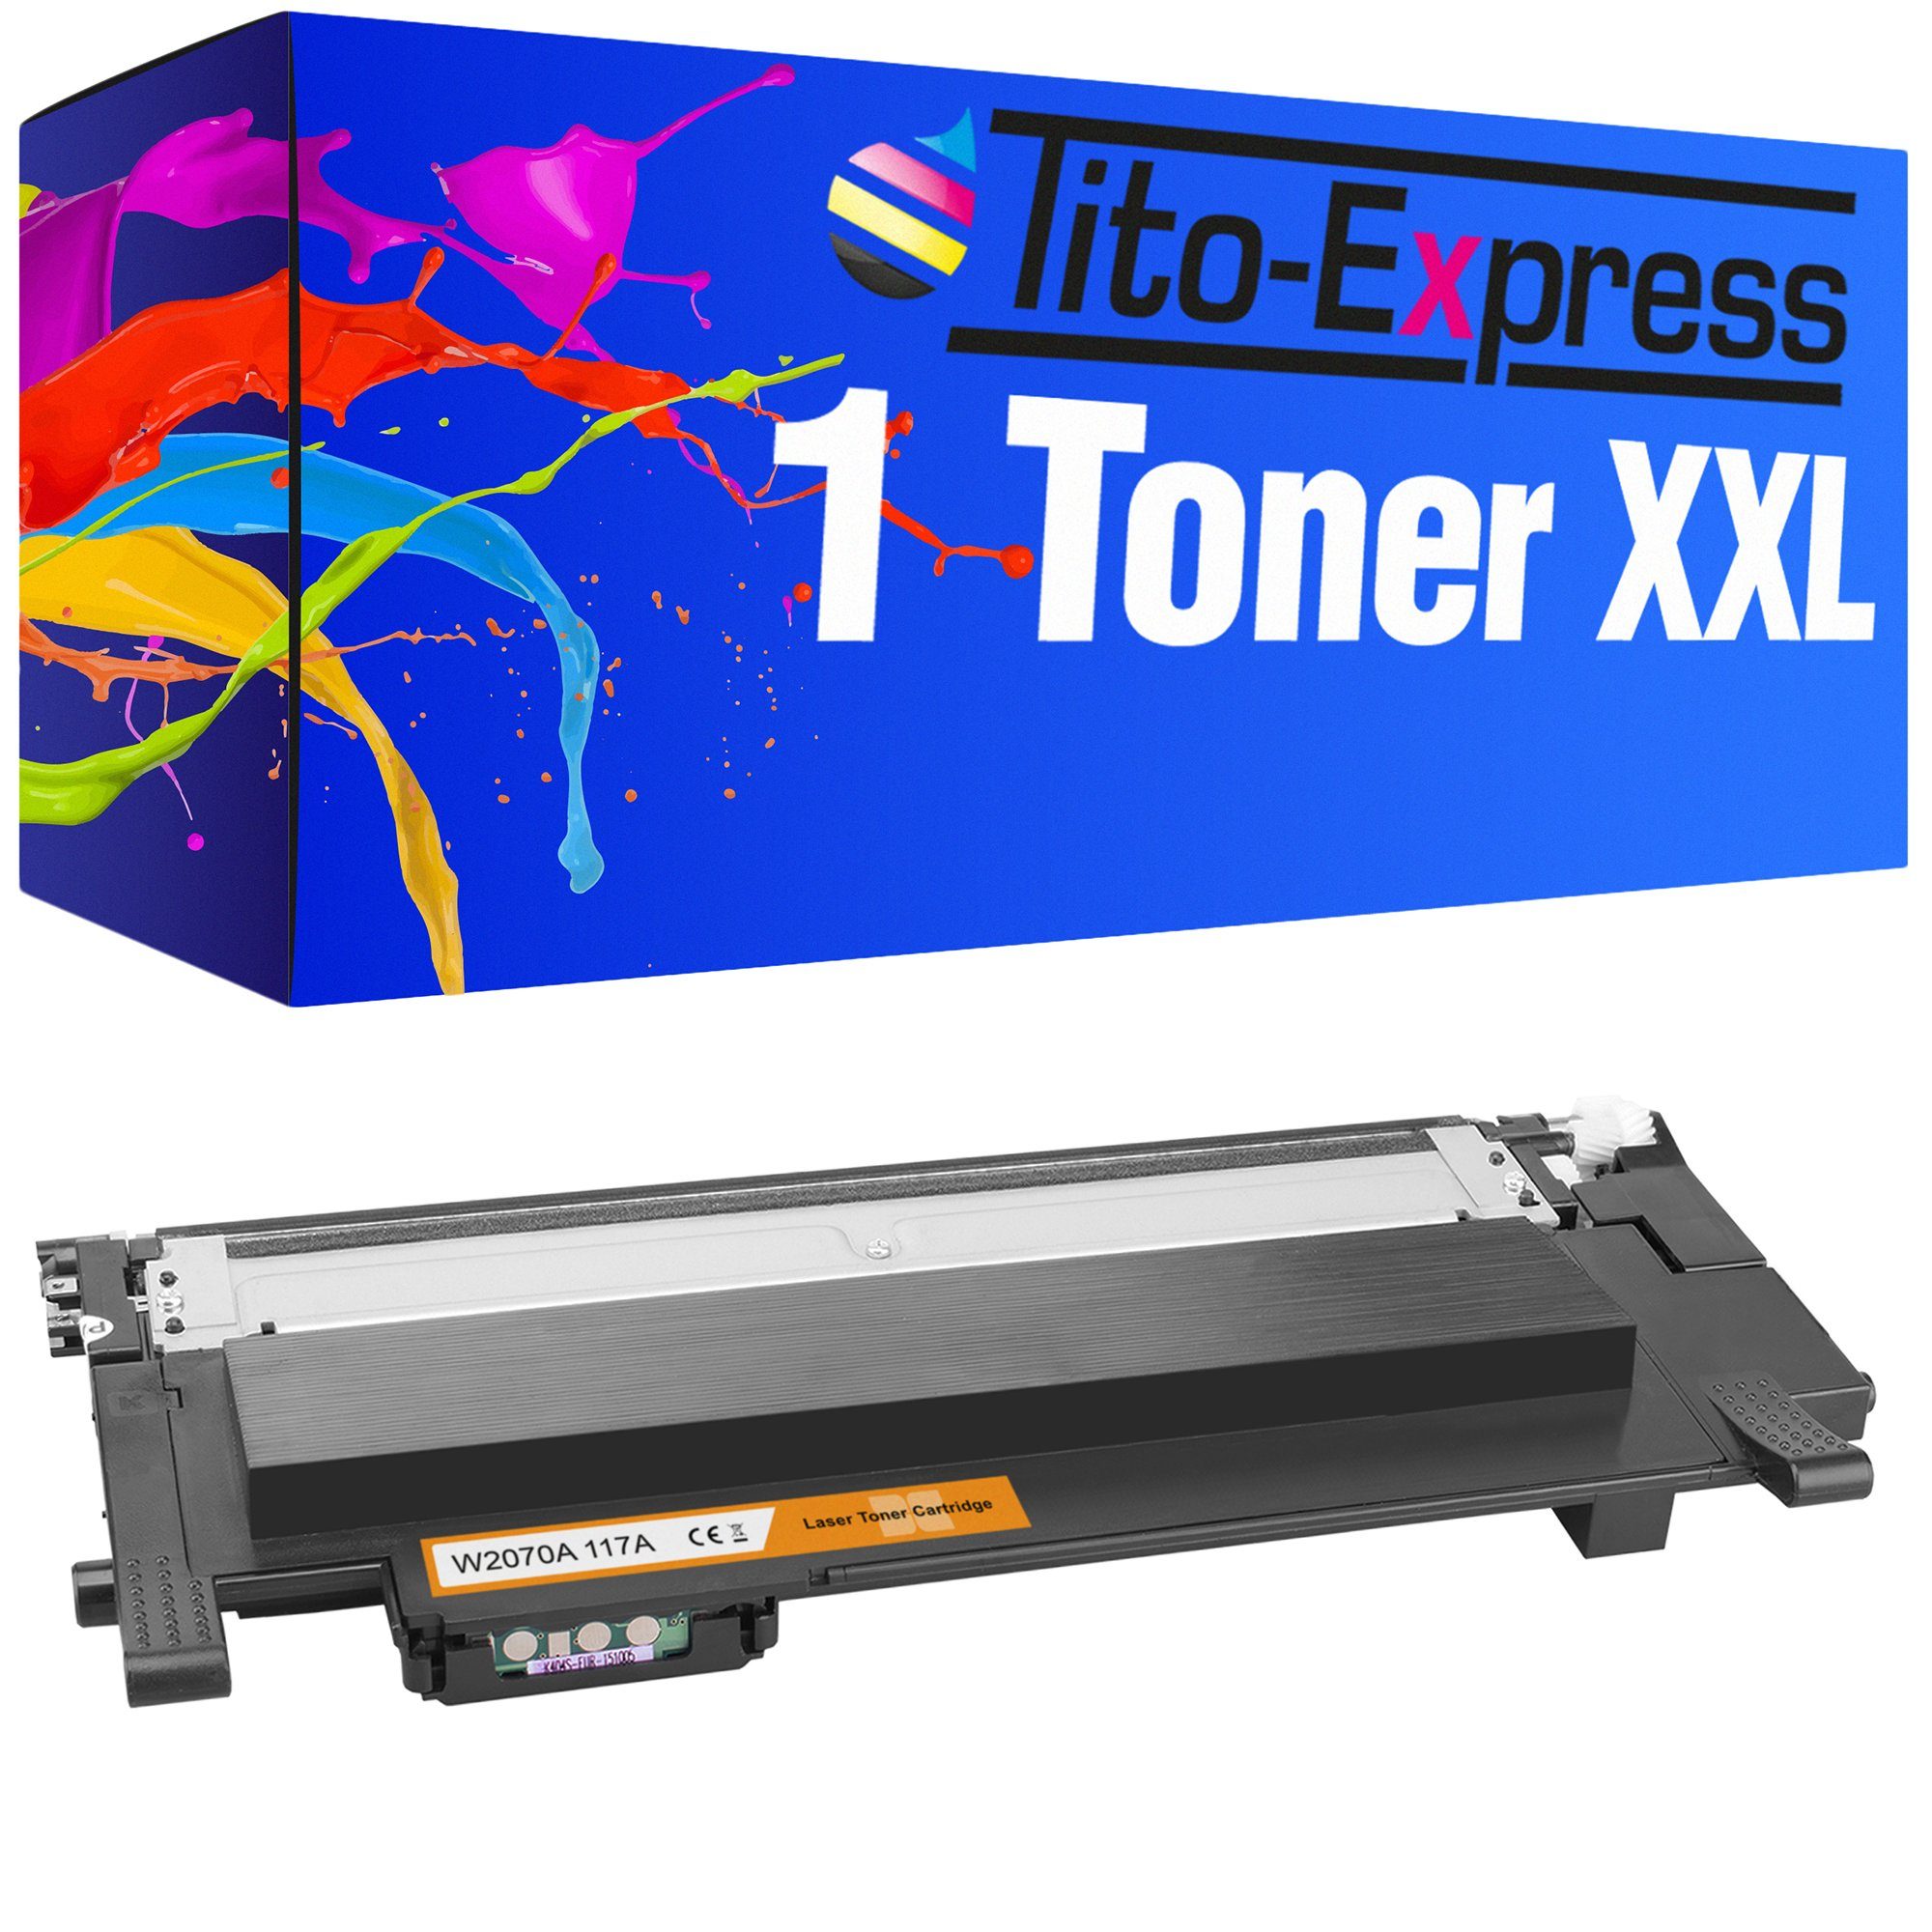 Tito-Express Tonerpatrone ersetzt HP W2070A W 2070 A HP 117A, (1x Black), für Color Laser MFP 178nwg 179fwg 150nw 179fnw 150a 178nw MFP-170 | Tonerpatronen